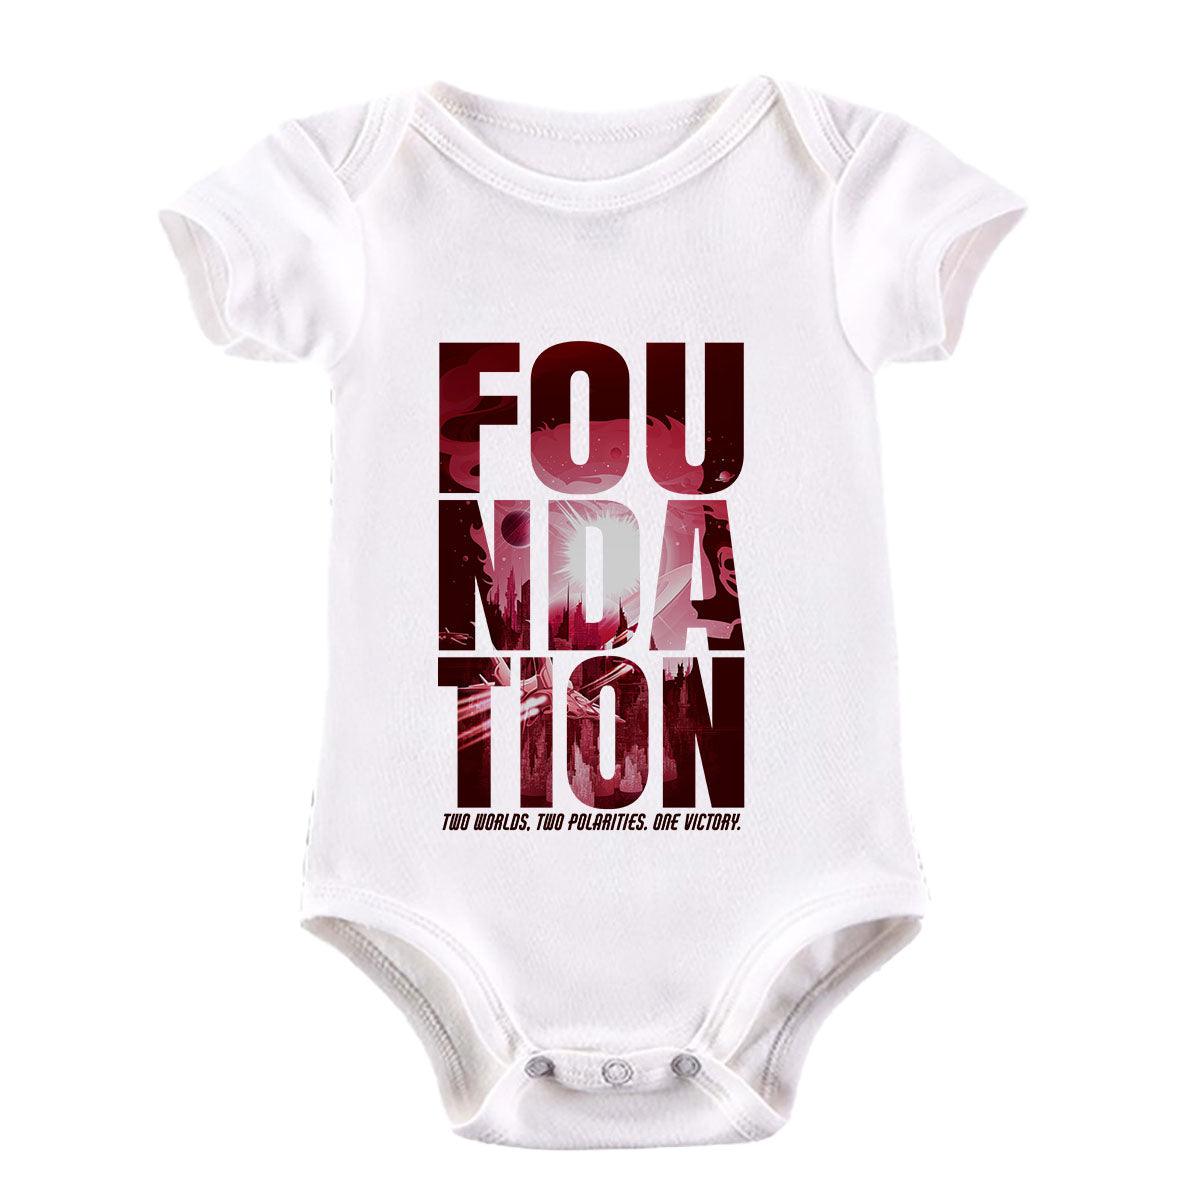 Foundation & empire Isaac Asimov T-Shirt Robot Android Science Fiction Baby & Toddler Body Suit - Kuzi Tees